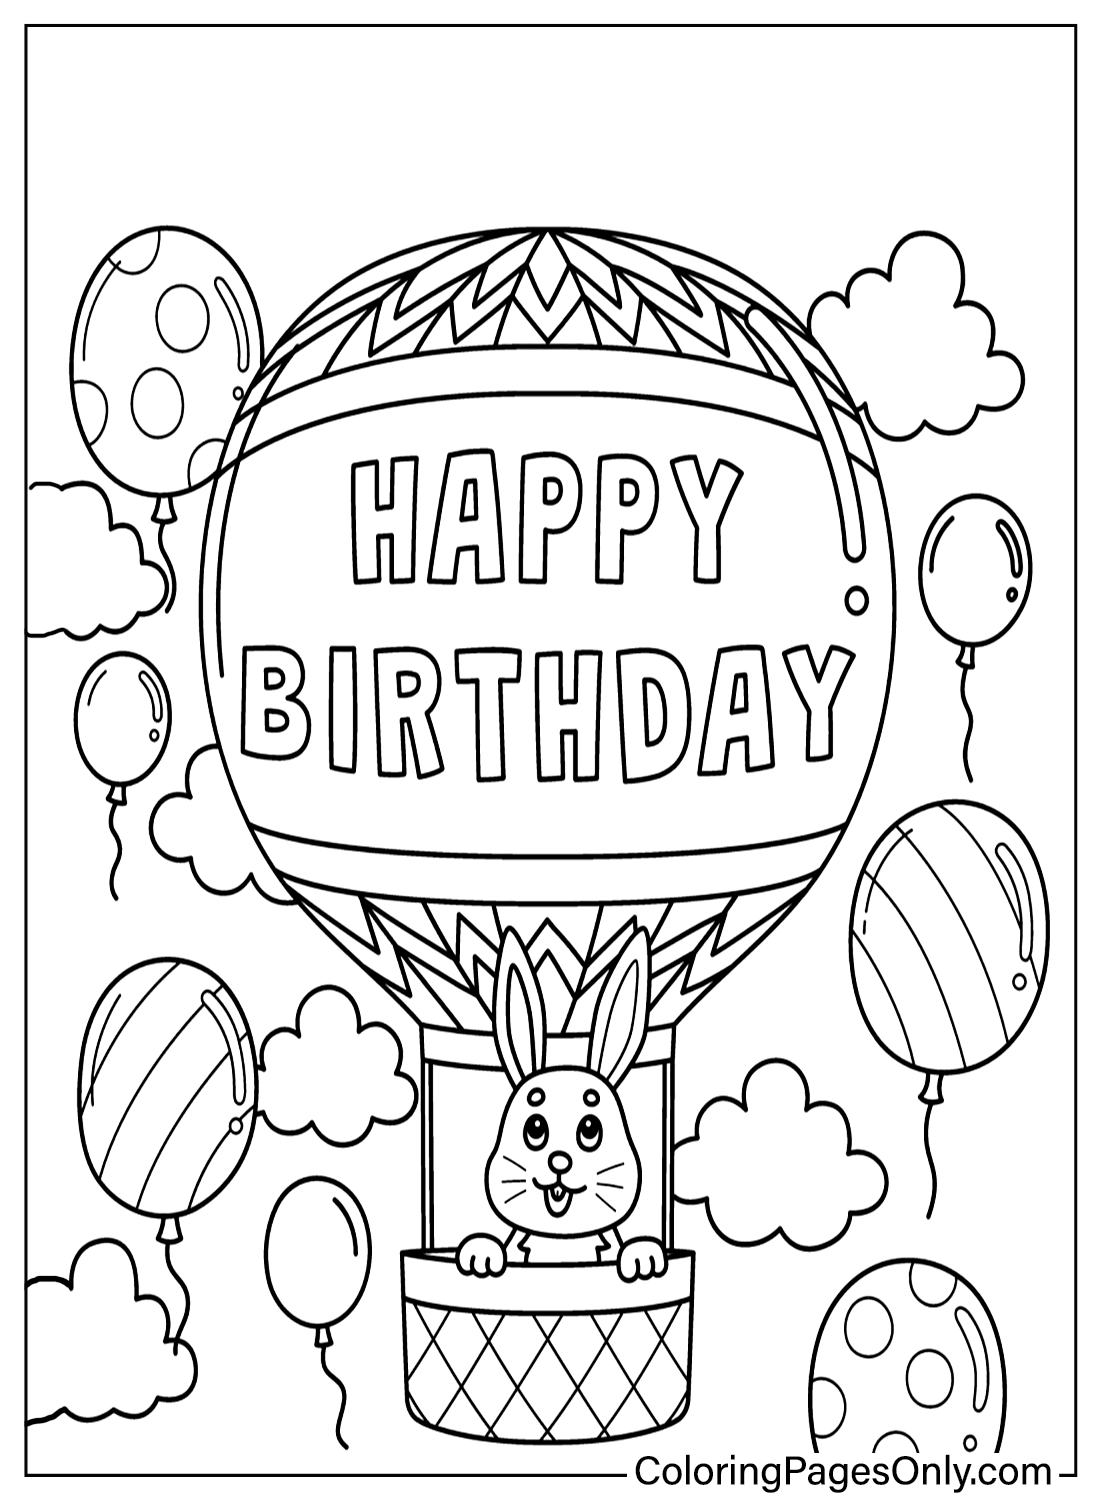 Happy Birthday Free Coloring Pages